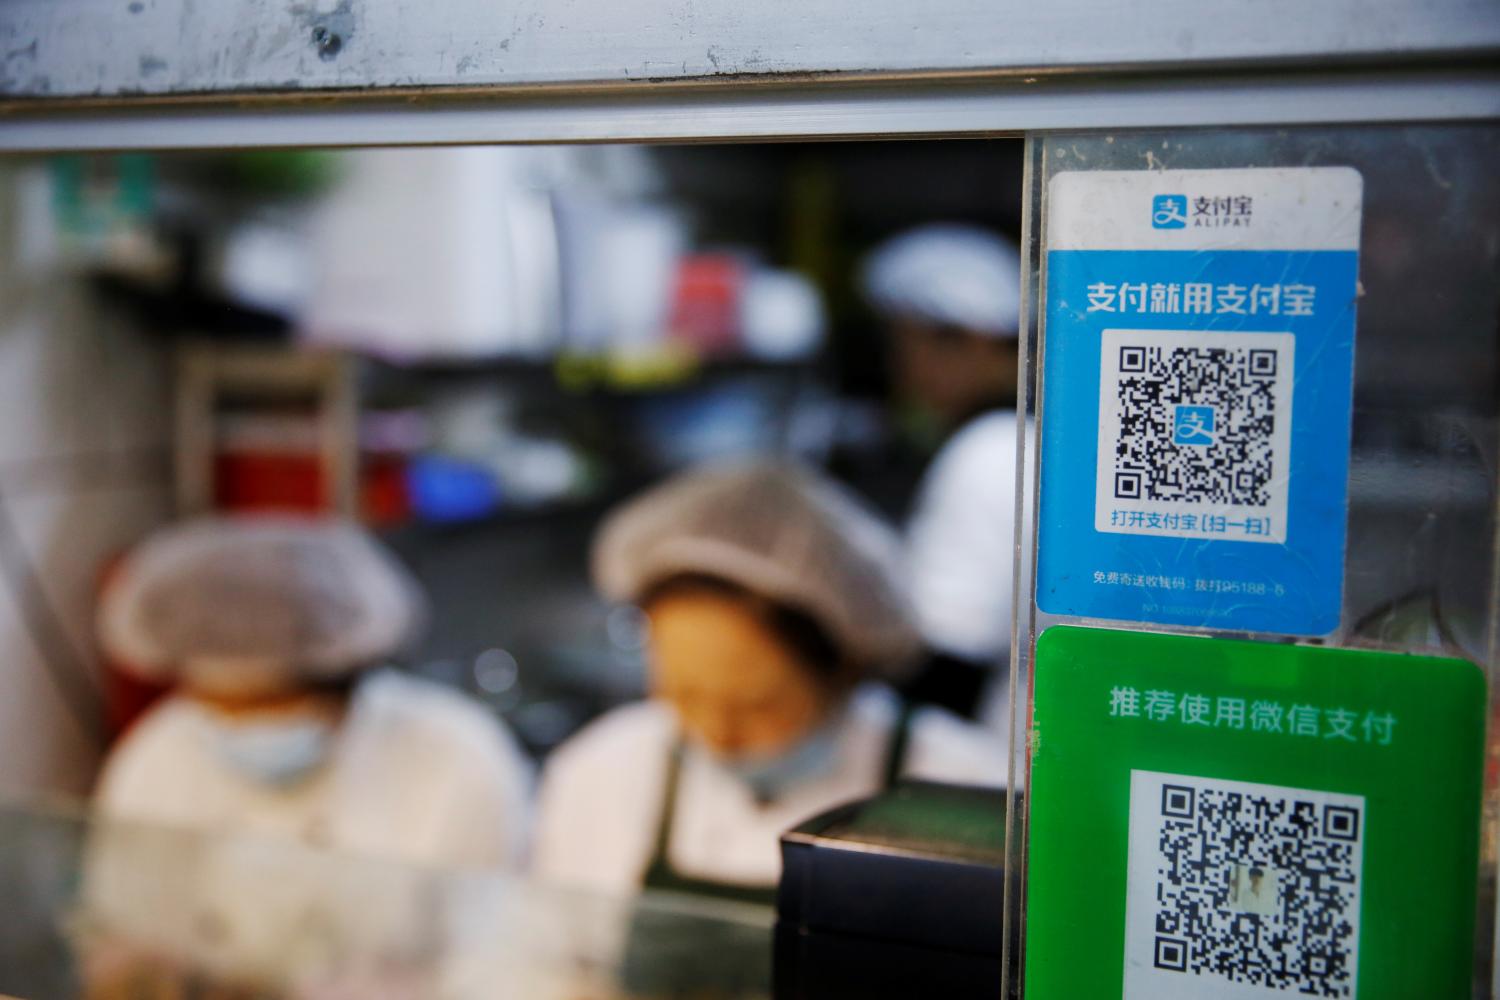 A QR code of digital payment device Alipay by Ant Group, an affiliate of Alibaba Group Holding, is seen next to a QR code of WeChat Pay at a food stall inside a market, in Beijing, China November 2, 2020. REUTERS/Tingshu Wang